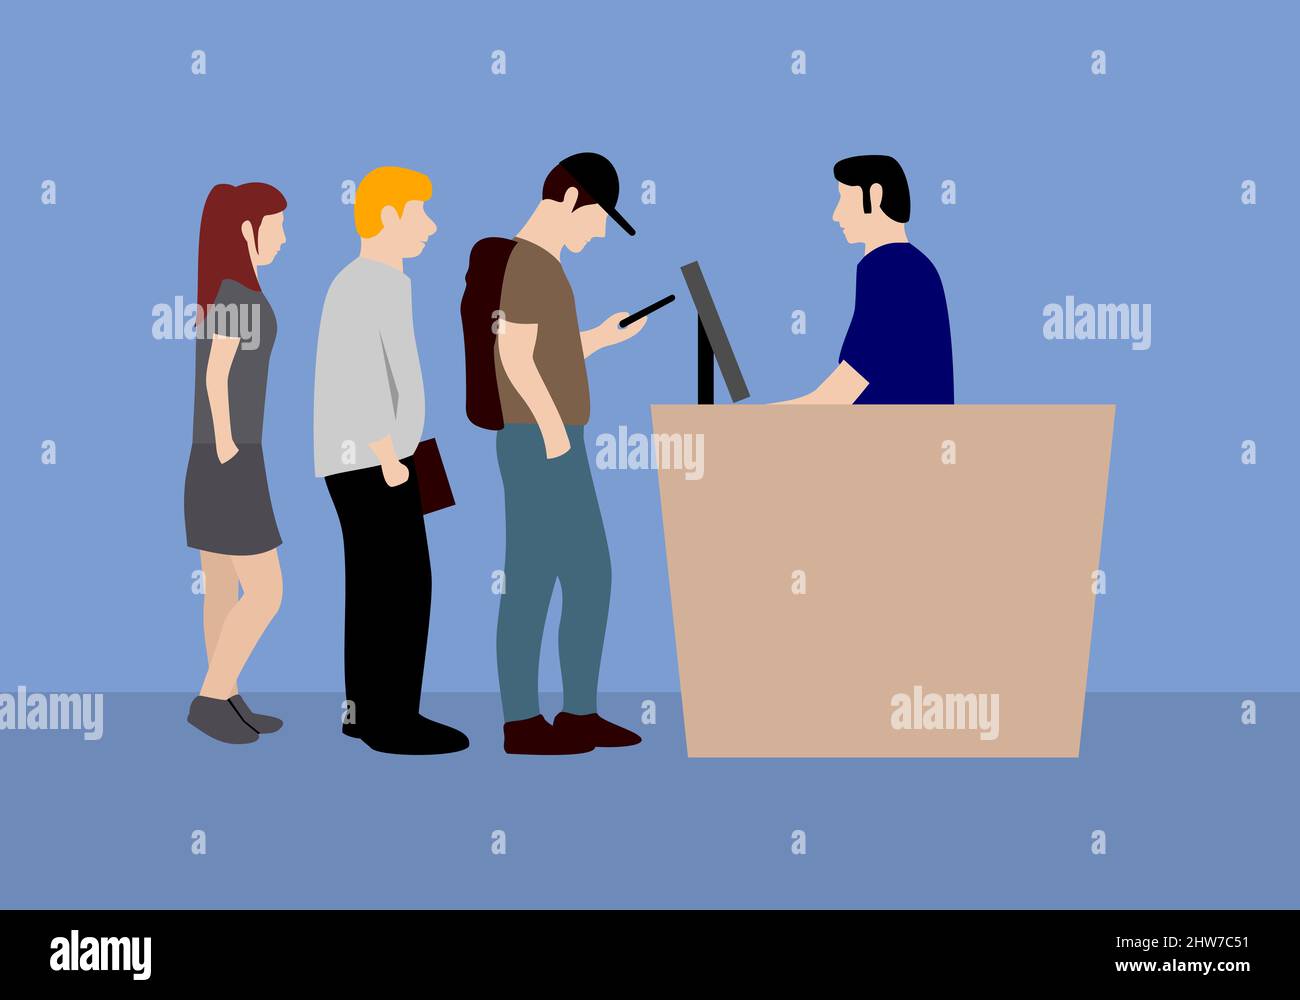 Queue character design illustration vector eps format , suitable for your design needs, logo, illustration, animation, etc. Stock Vector